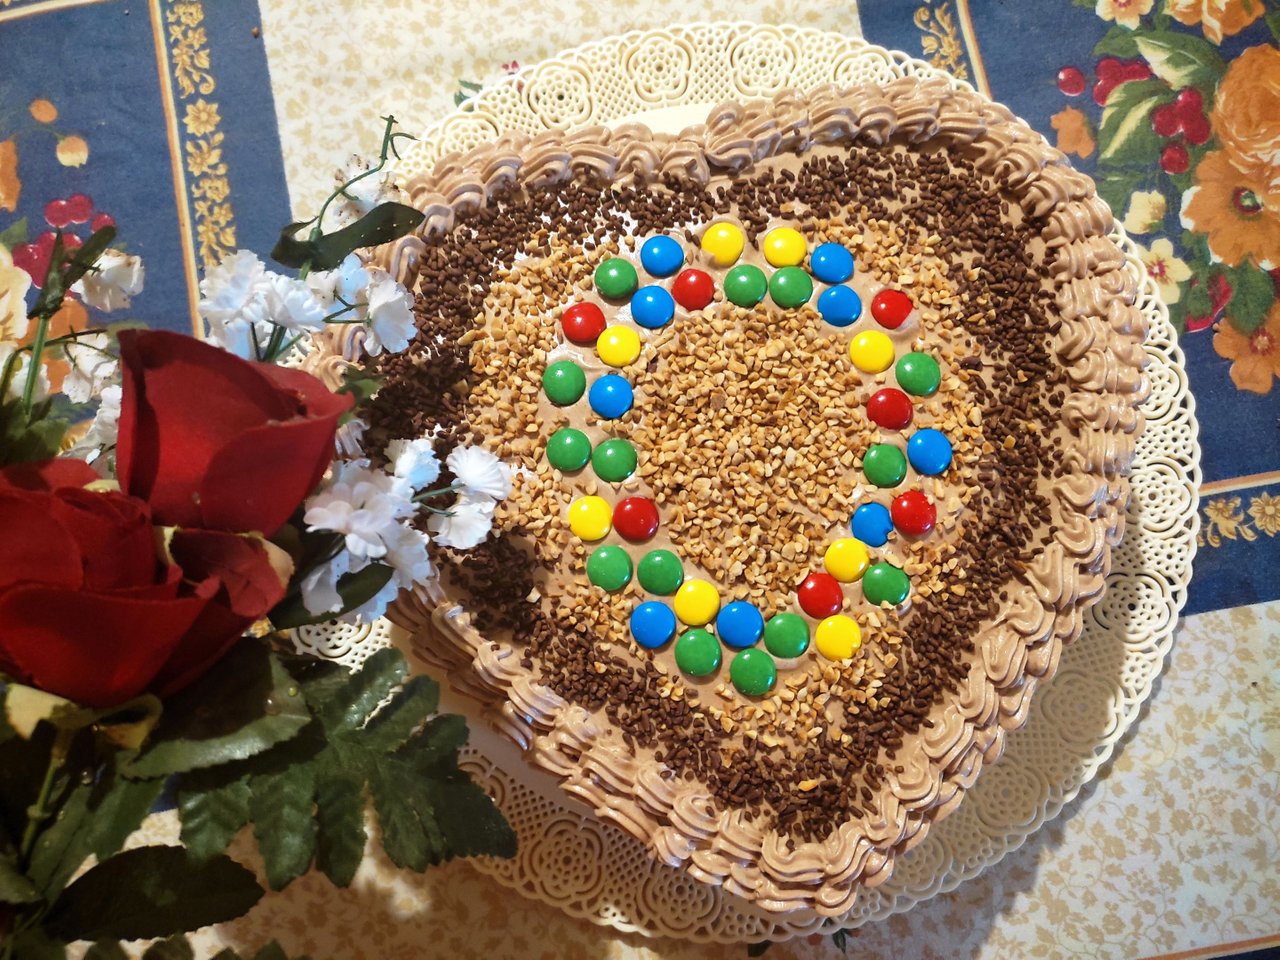 Recipe: Chocolate Cake Decorated with Chantilly, Peanuts, Chocolate Chips,  and Dandy - Receta: Pastel de chocolate decorado con Chantilly, maní,  chispas de chocolate y dandy. ????‍? | PeakD